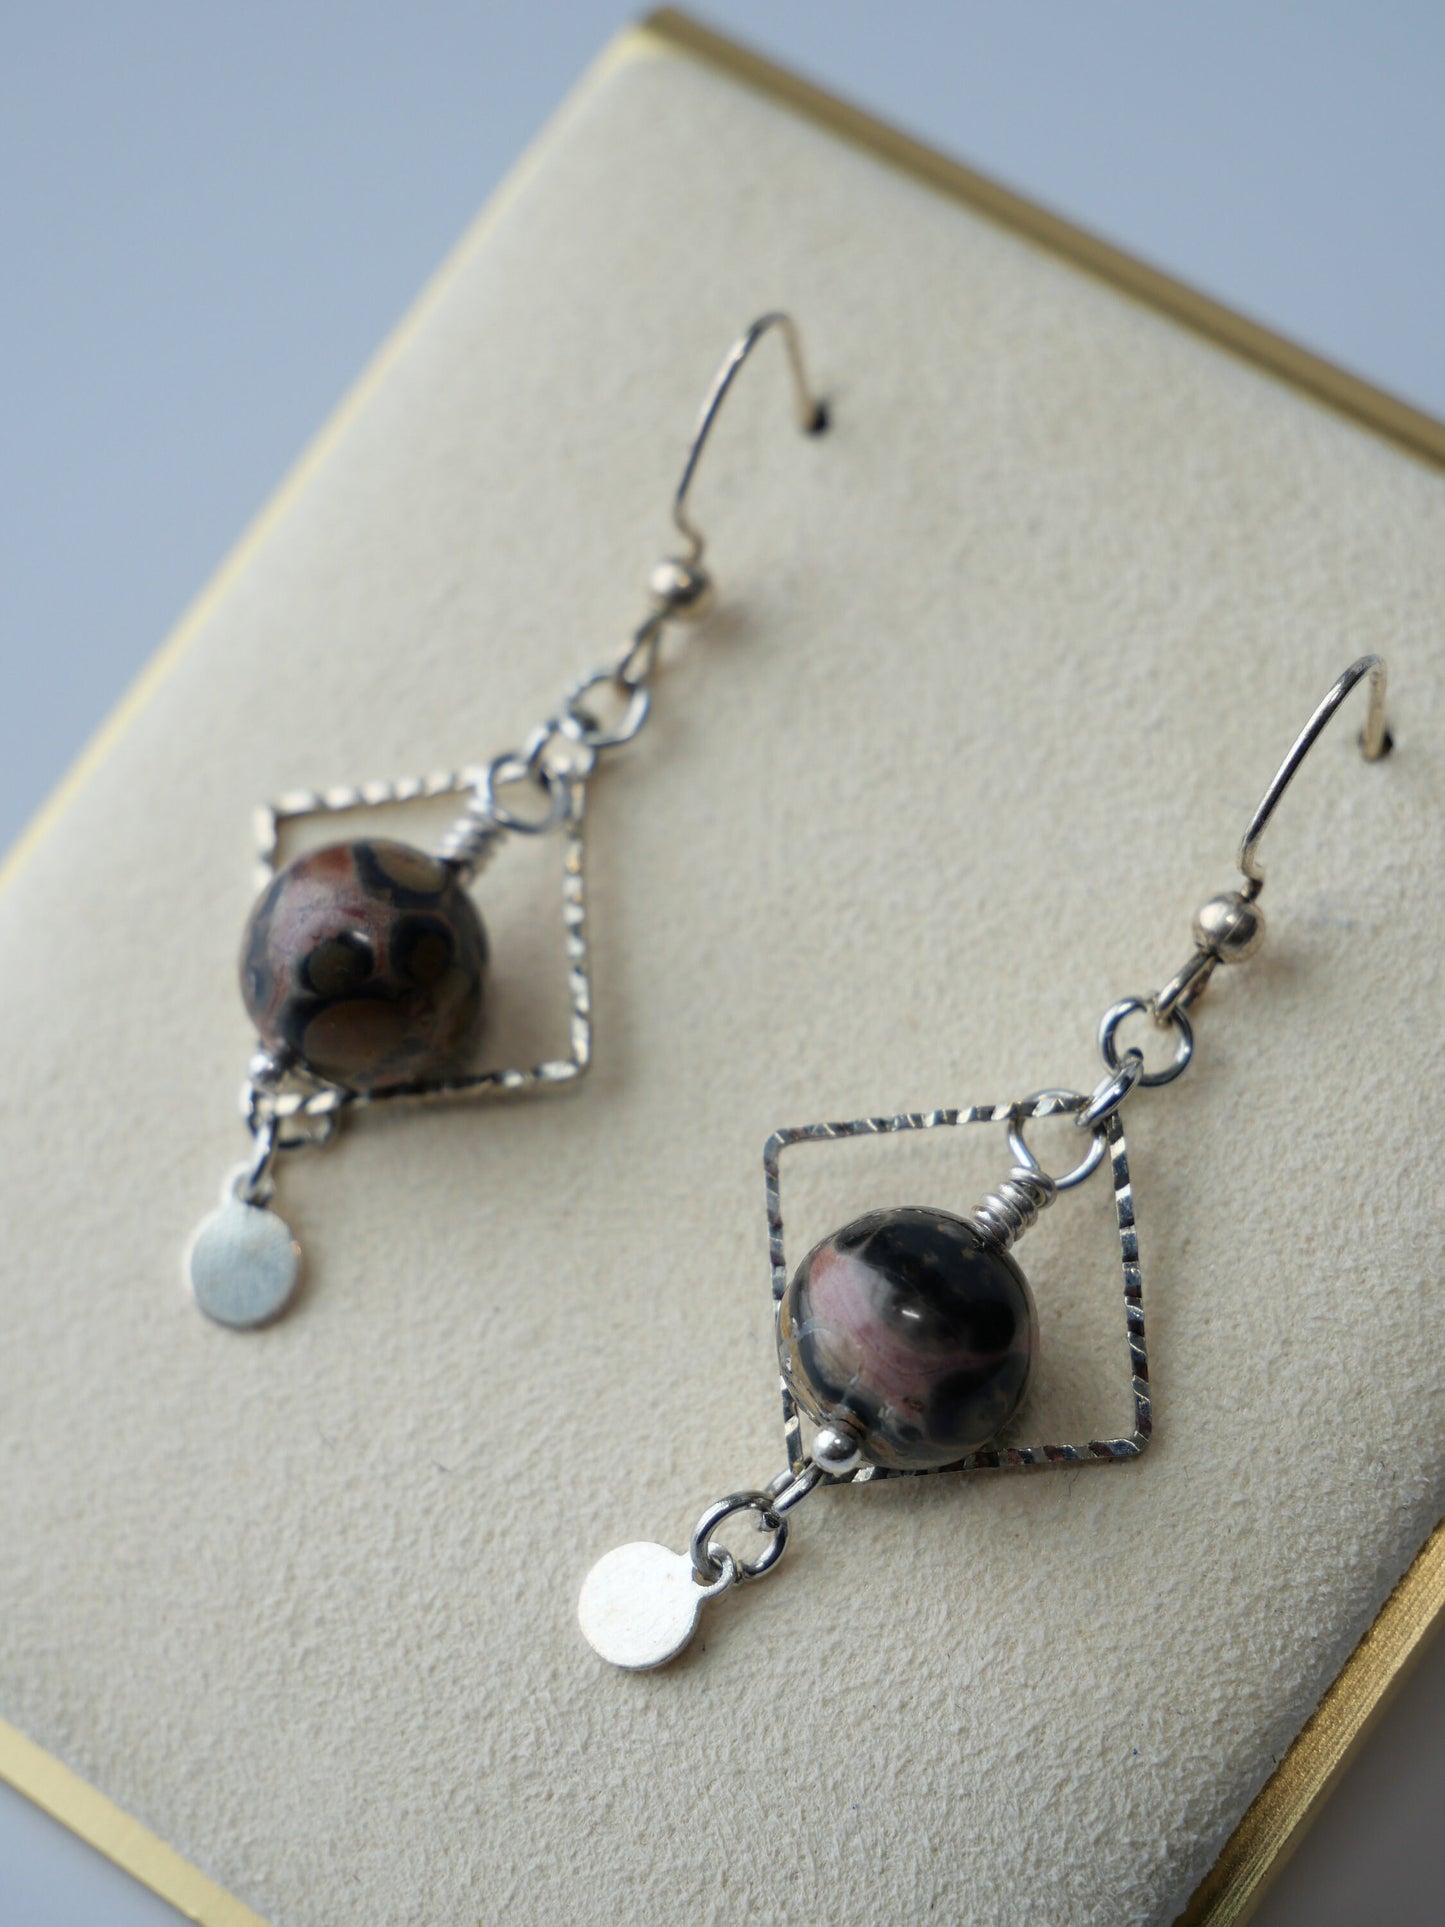 Silver, Geometric, Natural Stone Dangle Earrings, Hypoallergenic, Made in Maine, Inspired by Maine